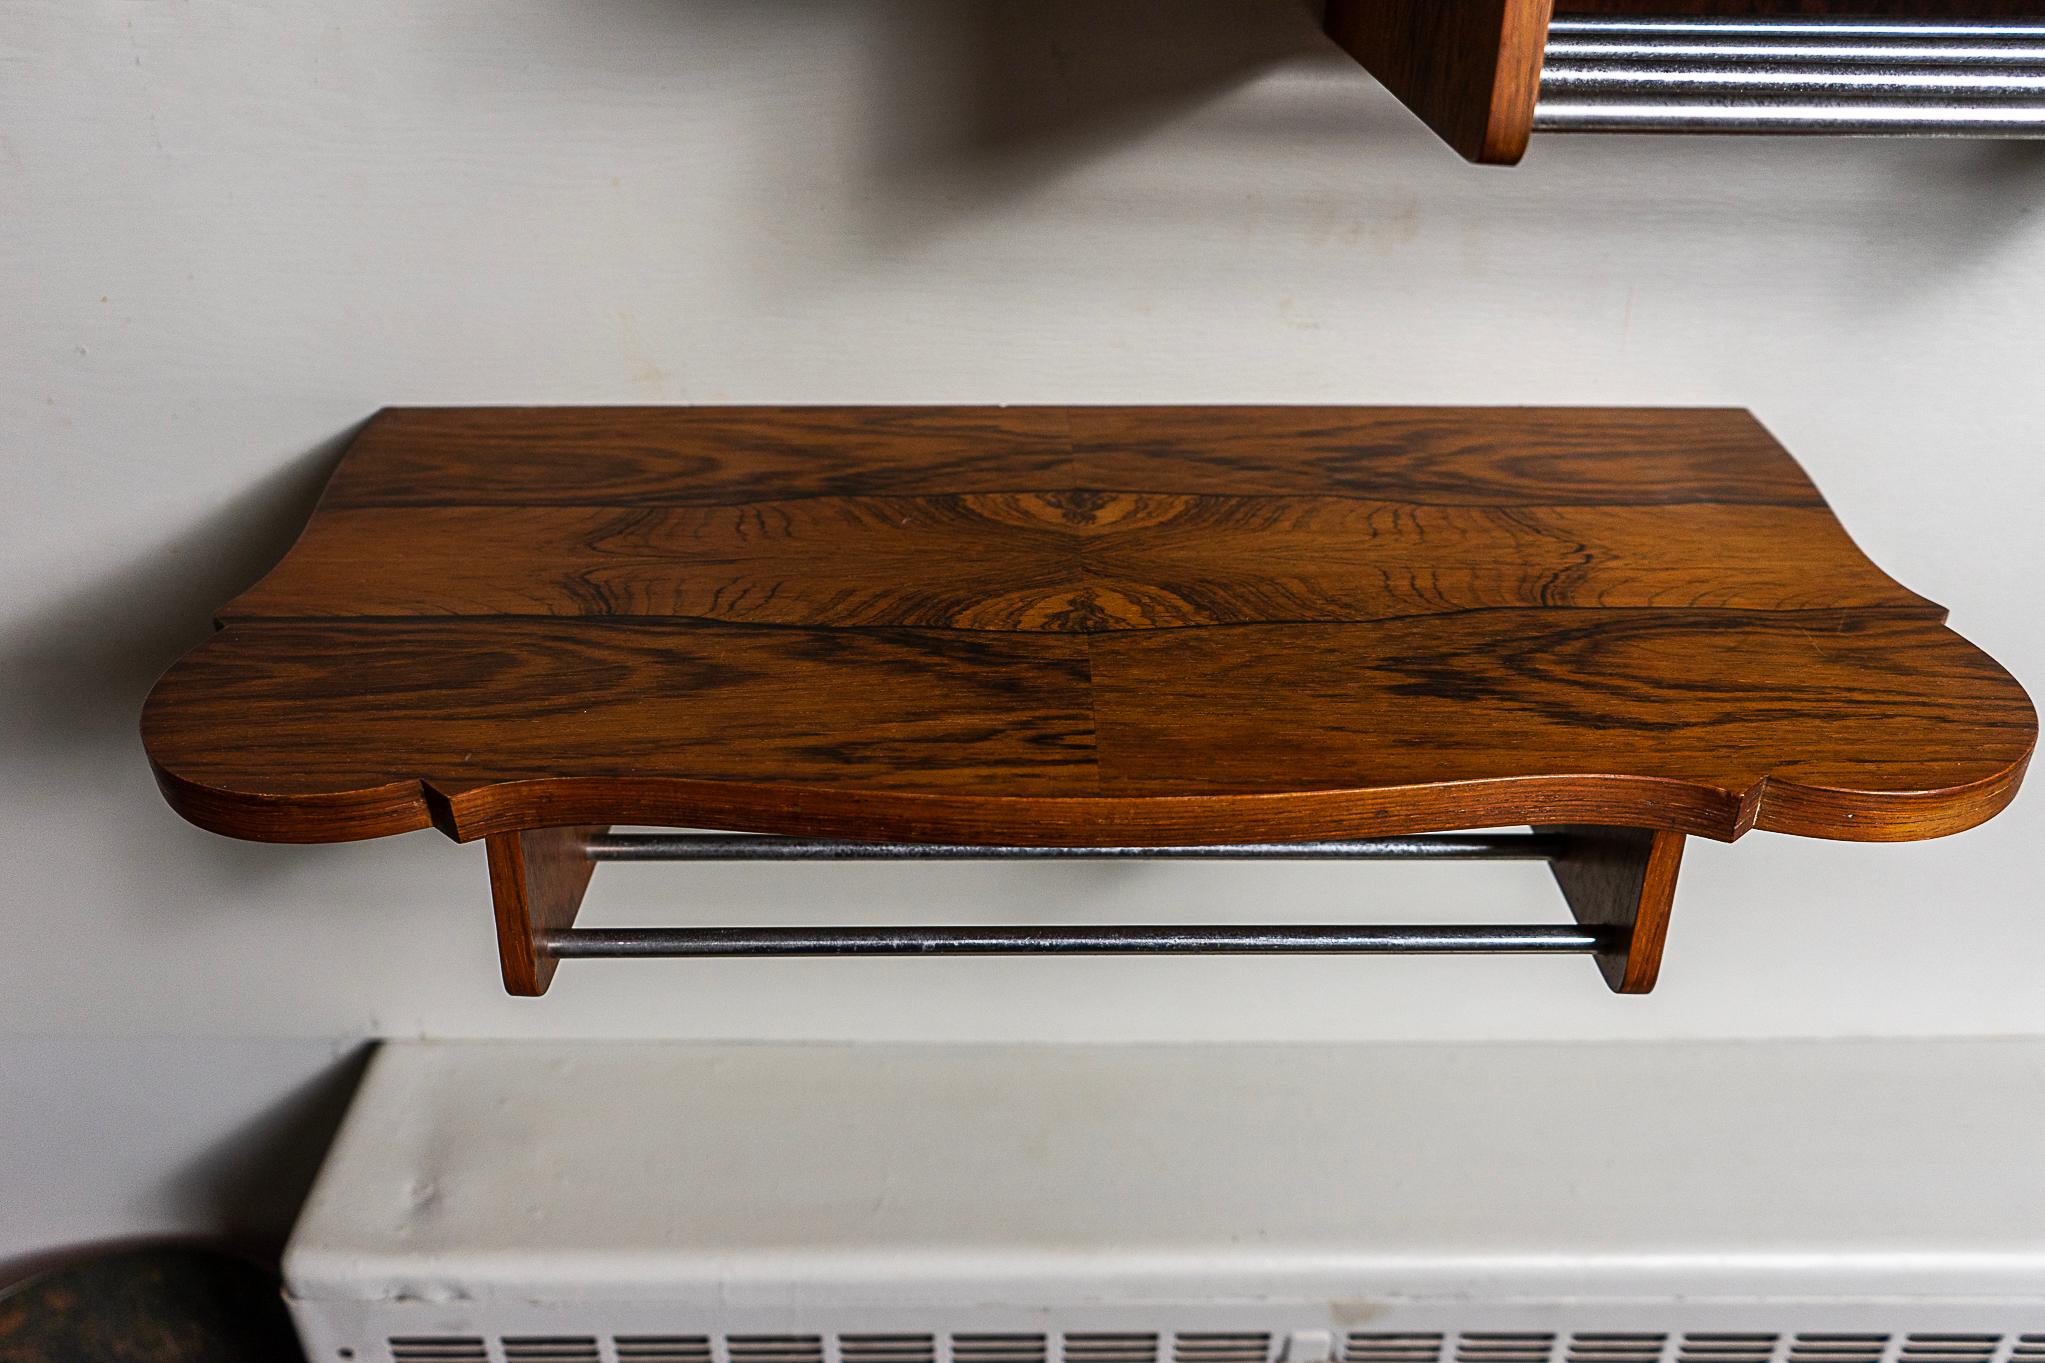 Pair of Danish Mid-Century Modern Rosewood Wall Mounted Bedsides / Night Stands For Sale 1